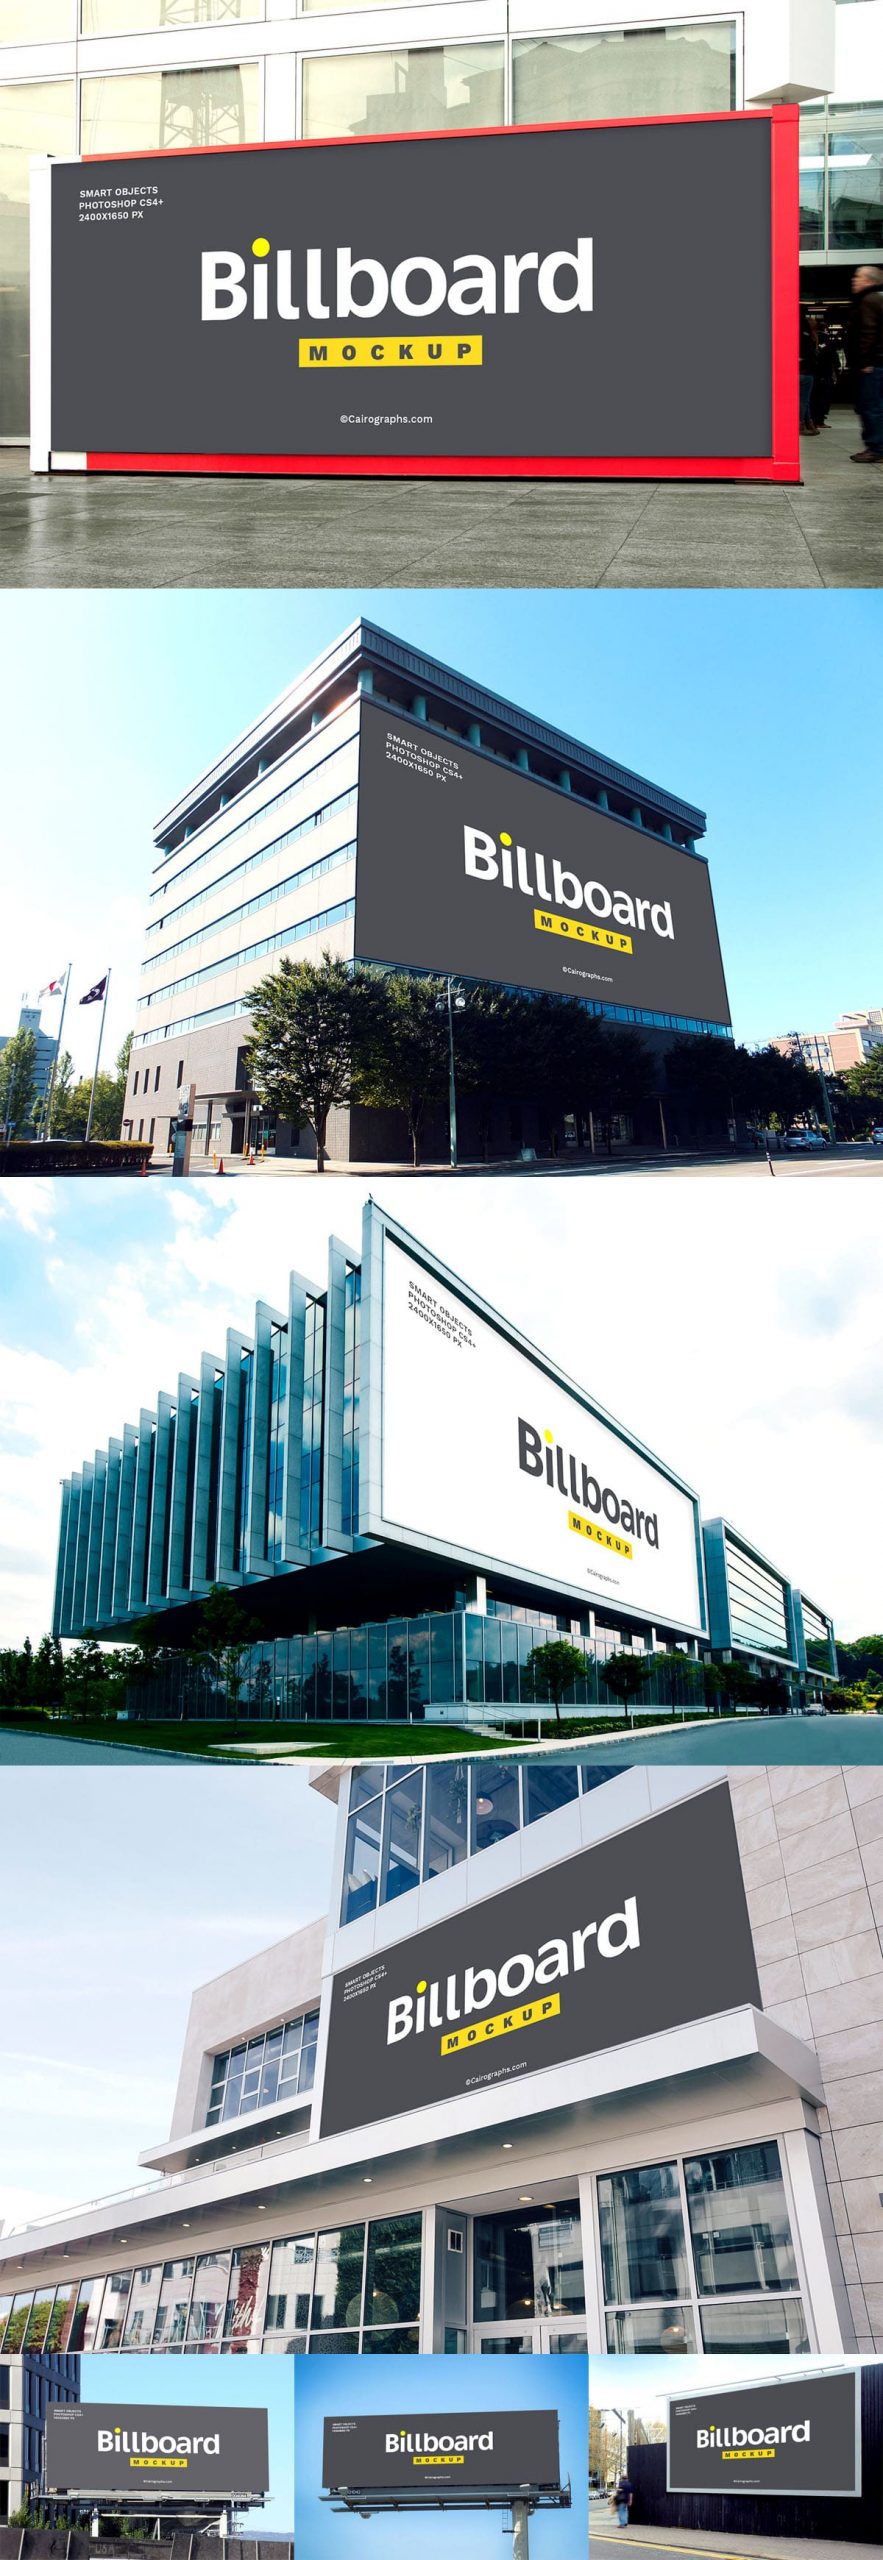 Free Billboards Mockups PSD - Find the Perfect Creative ...